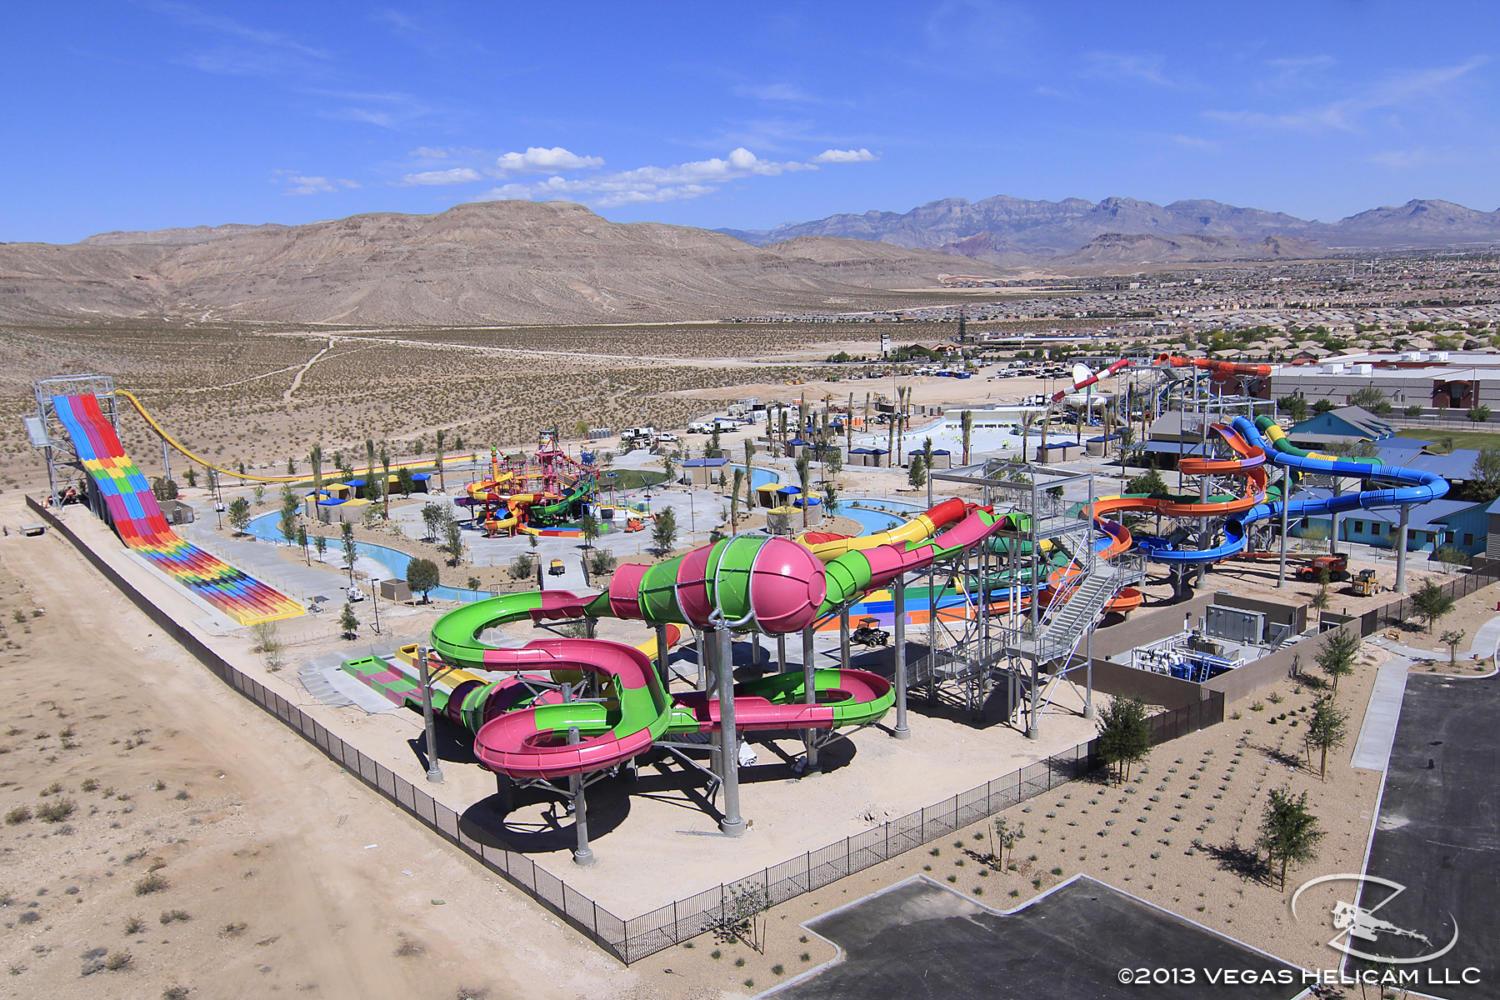 12 May 2013: An general view of the WetnWild water park during the final construction phase in Las Vegas, Nevada.  The water park is scheduled to open on Memorial Day.